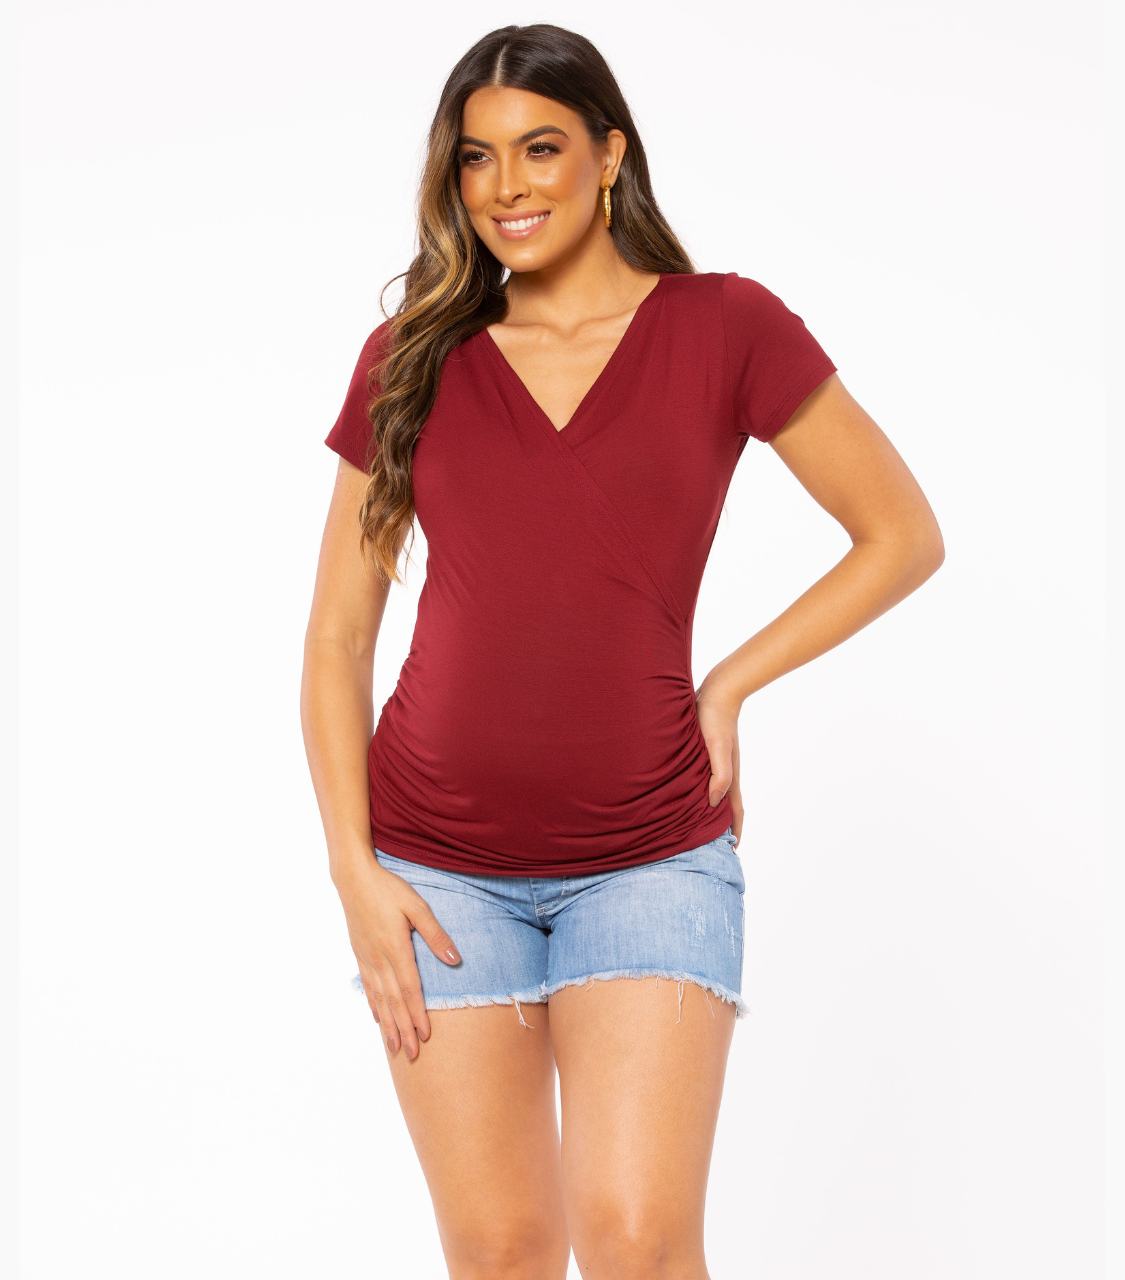 Burgundy Maternity Tank Top - Crossover/Wrap Nursing Top from front